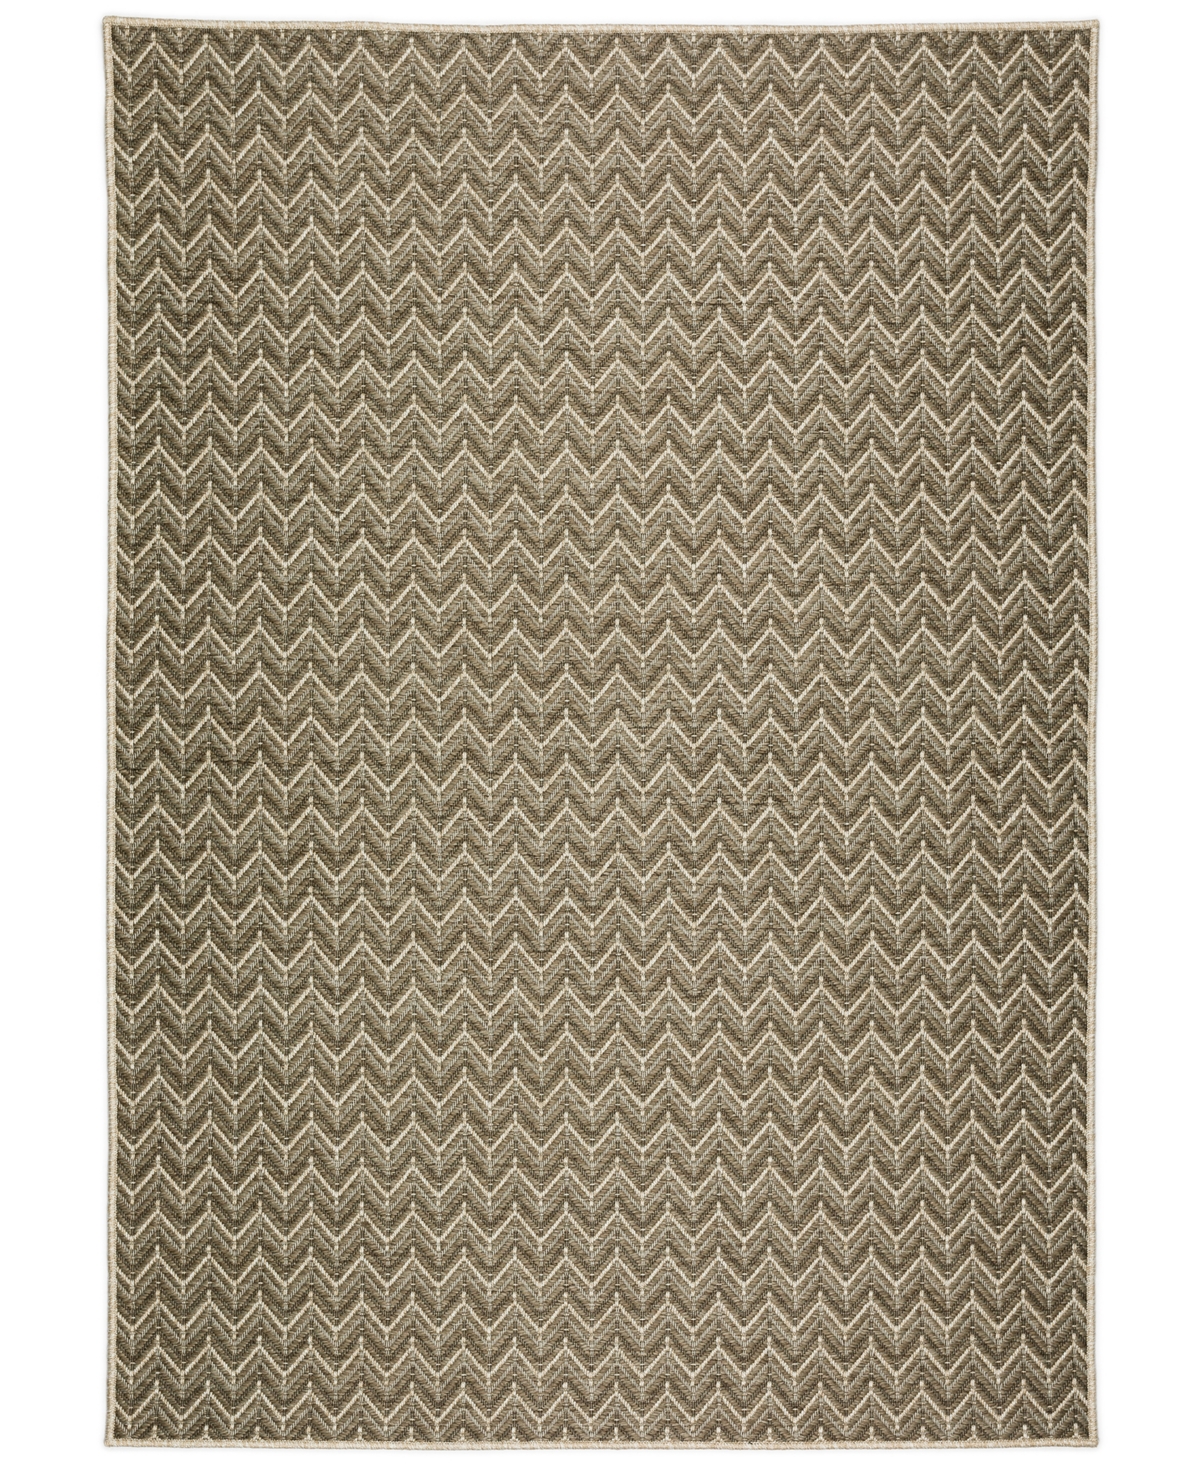 D Style Nusa Outdoor Nsa1 1'8" X 2'6" Area Rug In Gray